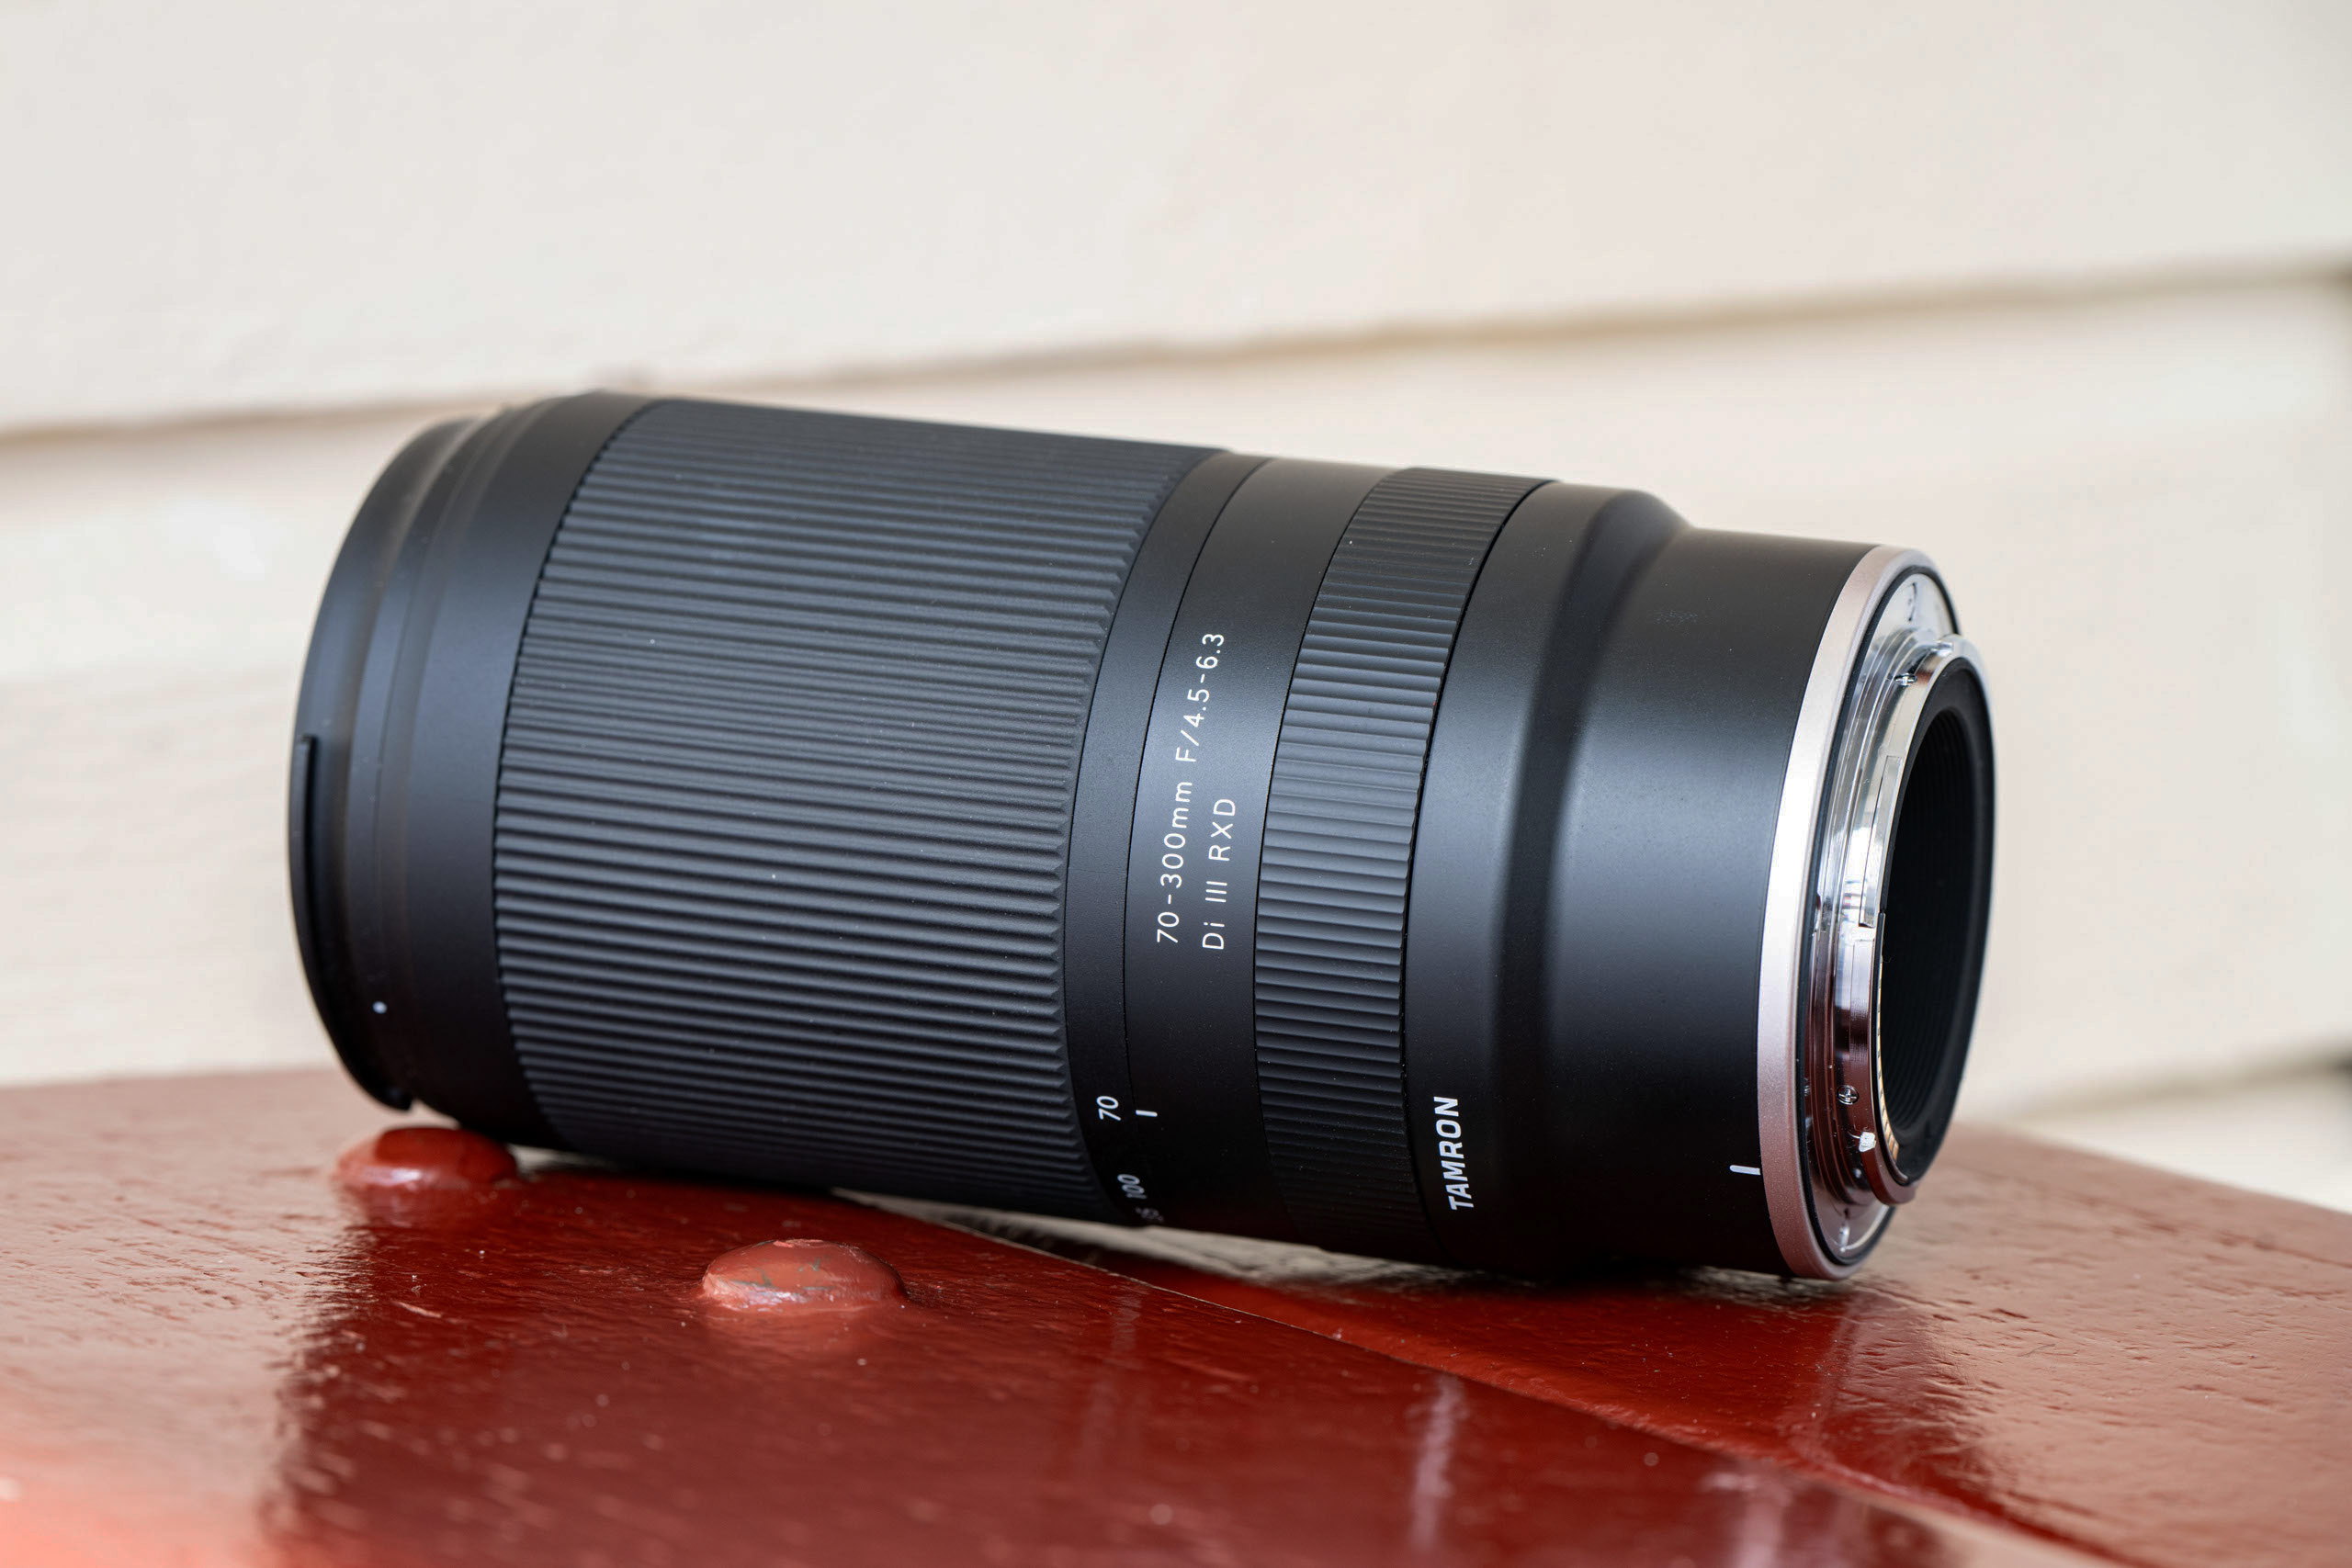 Tamron 70-300mm F/4.5-6.3 Di III RXD Lens Announced - Take A Look At Sample  Photos